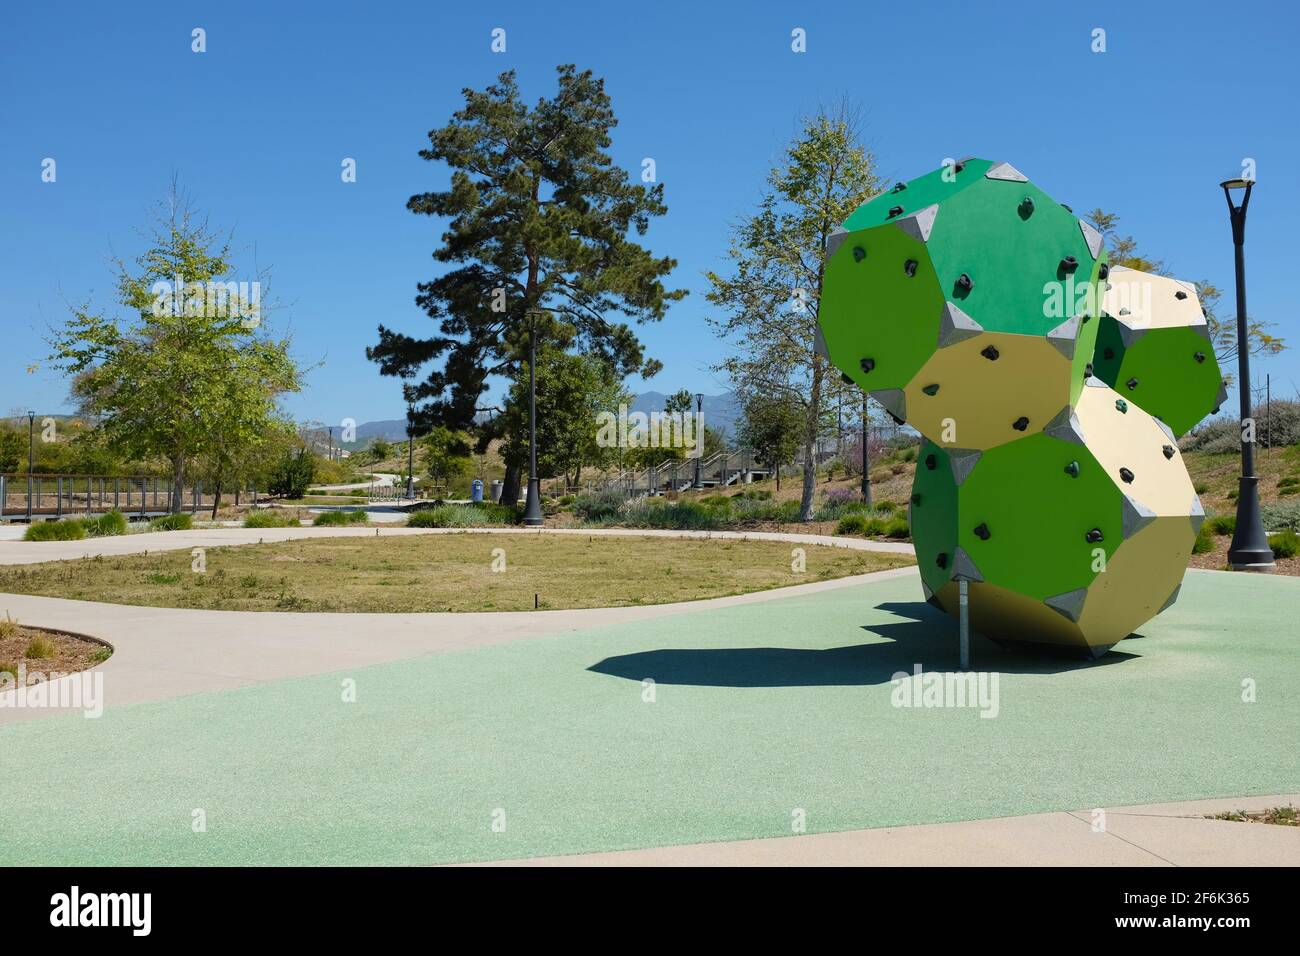 IRVINE, CALIFORNIA - 29 MAR 2021: Climbing Structure in the playground of the Bosque area of the Orange County Great Park. Stock Photo